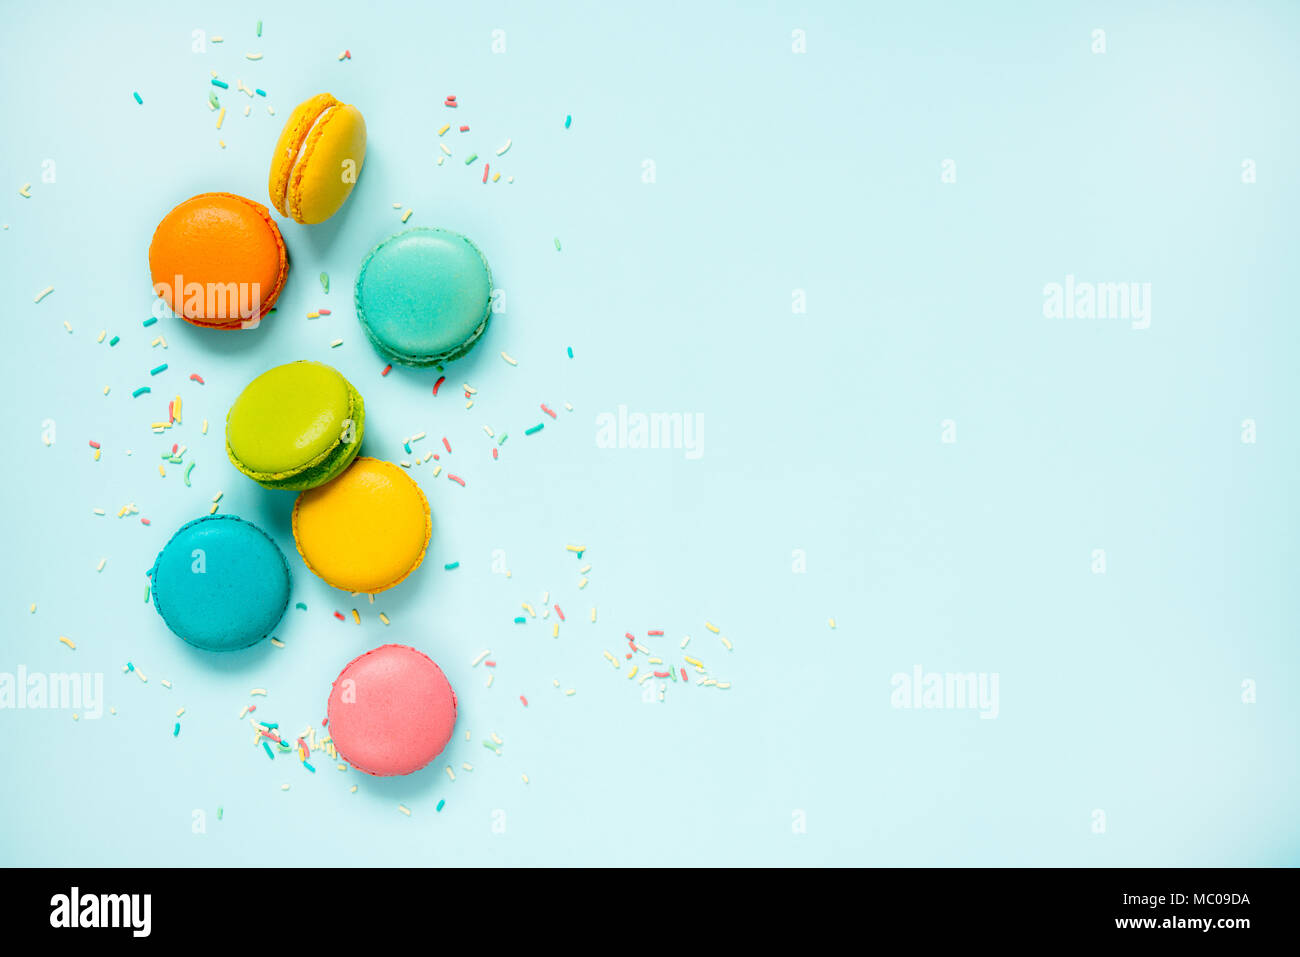 Colorful macaroons and sugar sprinkles arranged over blue background. Copy space. Stock Photo